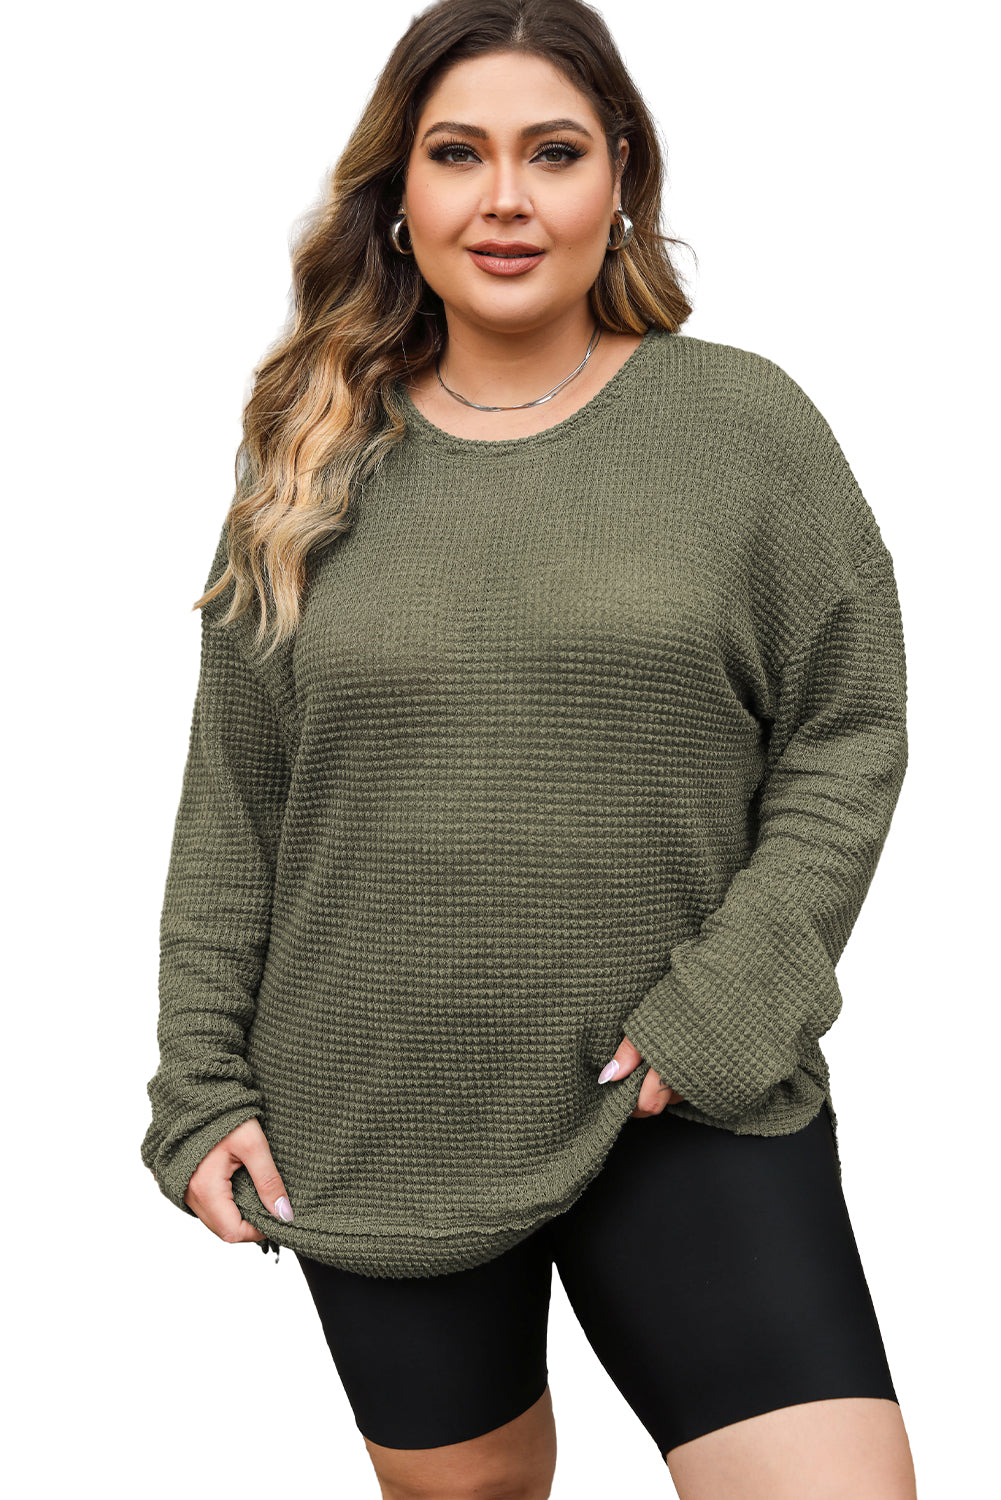 Moss Green Plus Size Textured Knit Long Sleeve Top